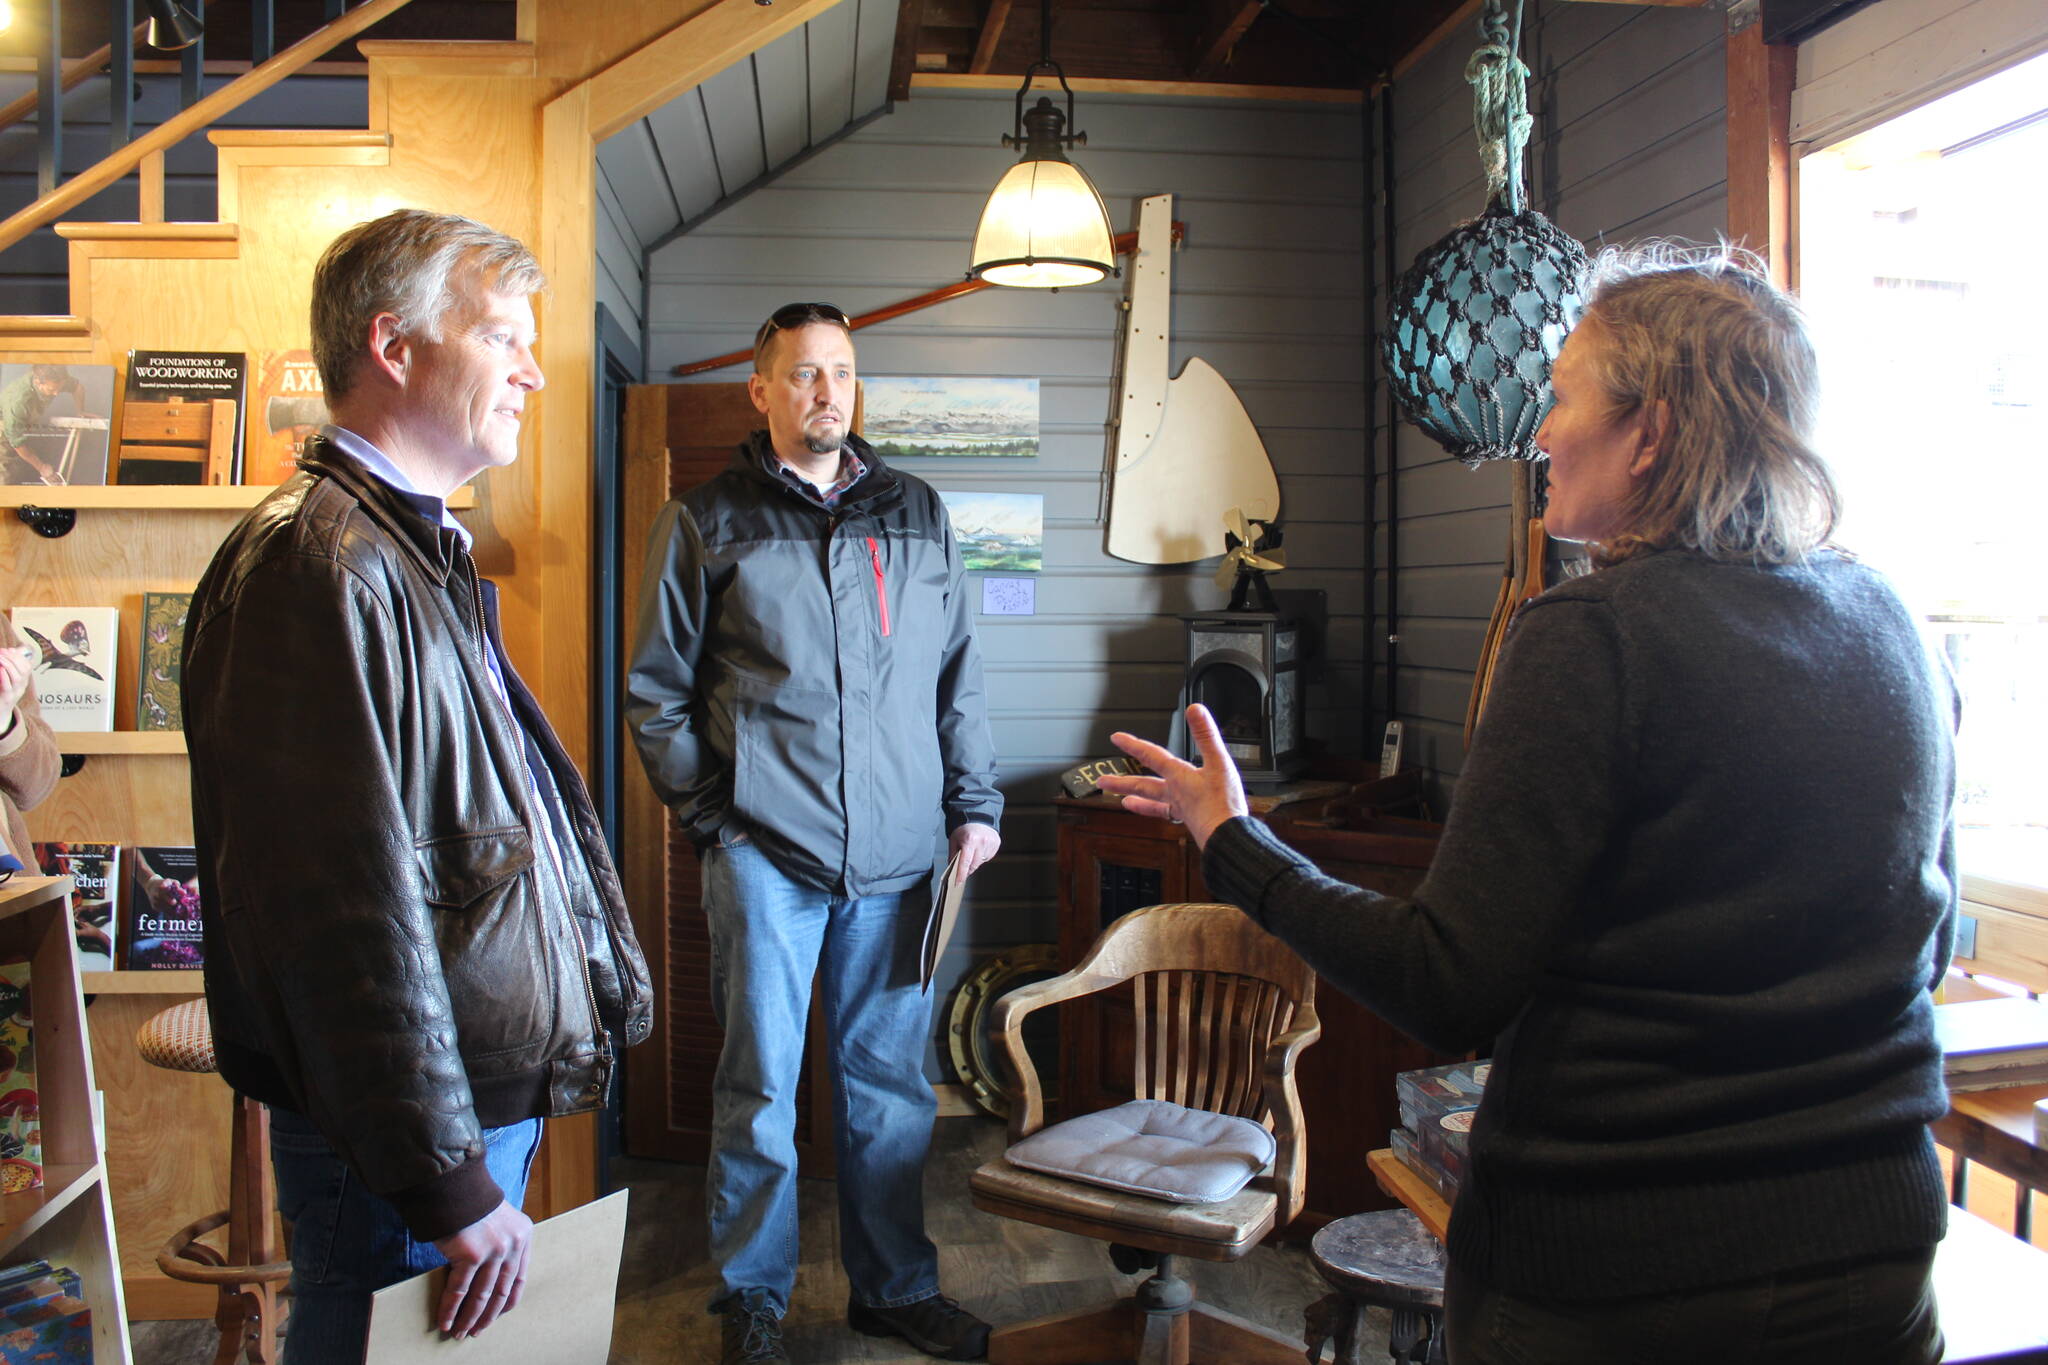 Photo by Karina Andrew/Whidbey News Group
<em>State Reps. Dave Paul, left, and Greg Gilday learn about the historic preservation work that took place in Kingfisher Bookstore from Meg Olsen, the store’s owner. The original harbor door on the building’s lower level was used when the building housed a confectionary.</em>